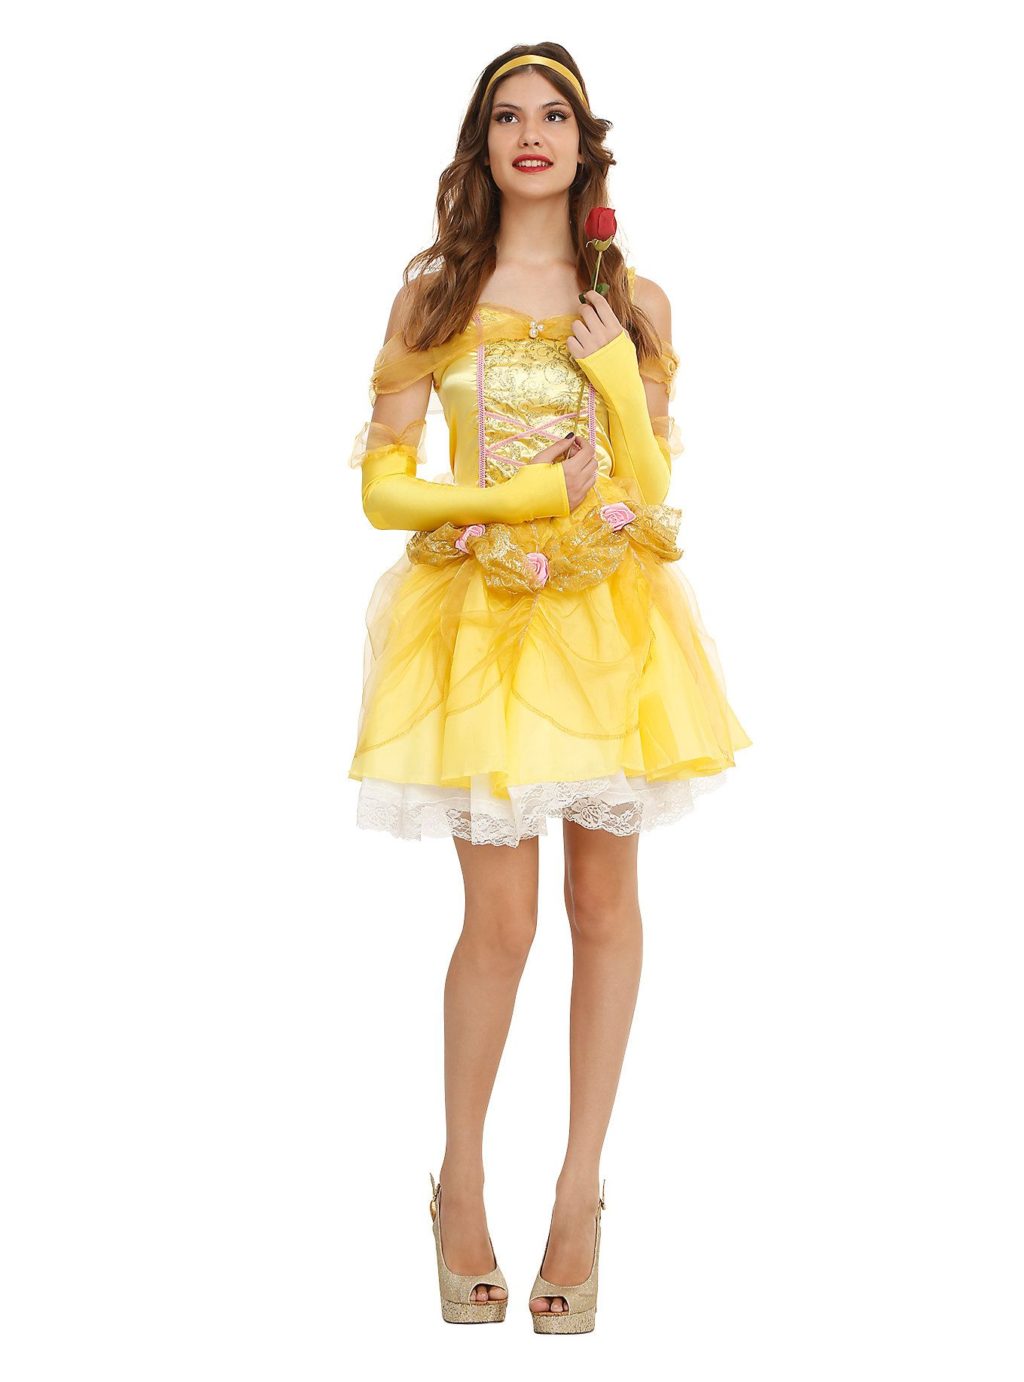 Belle 1 50+ Cutest Disney Inspired Outfit Ideas for Girls - 32